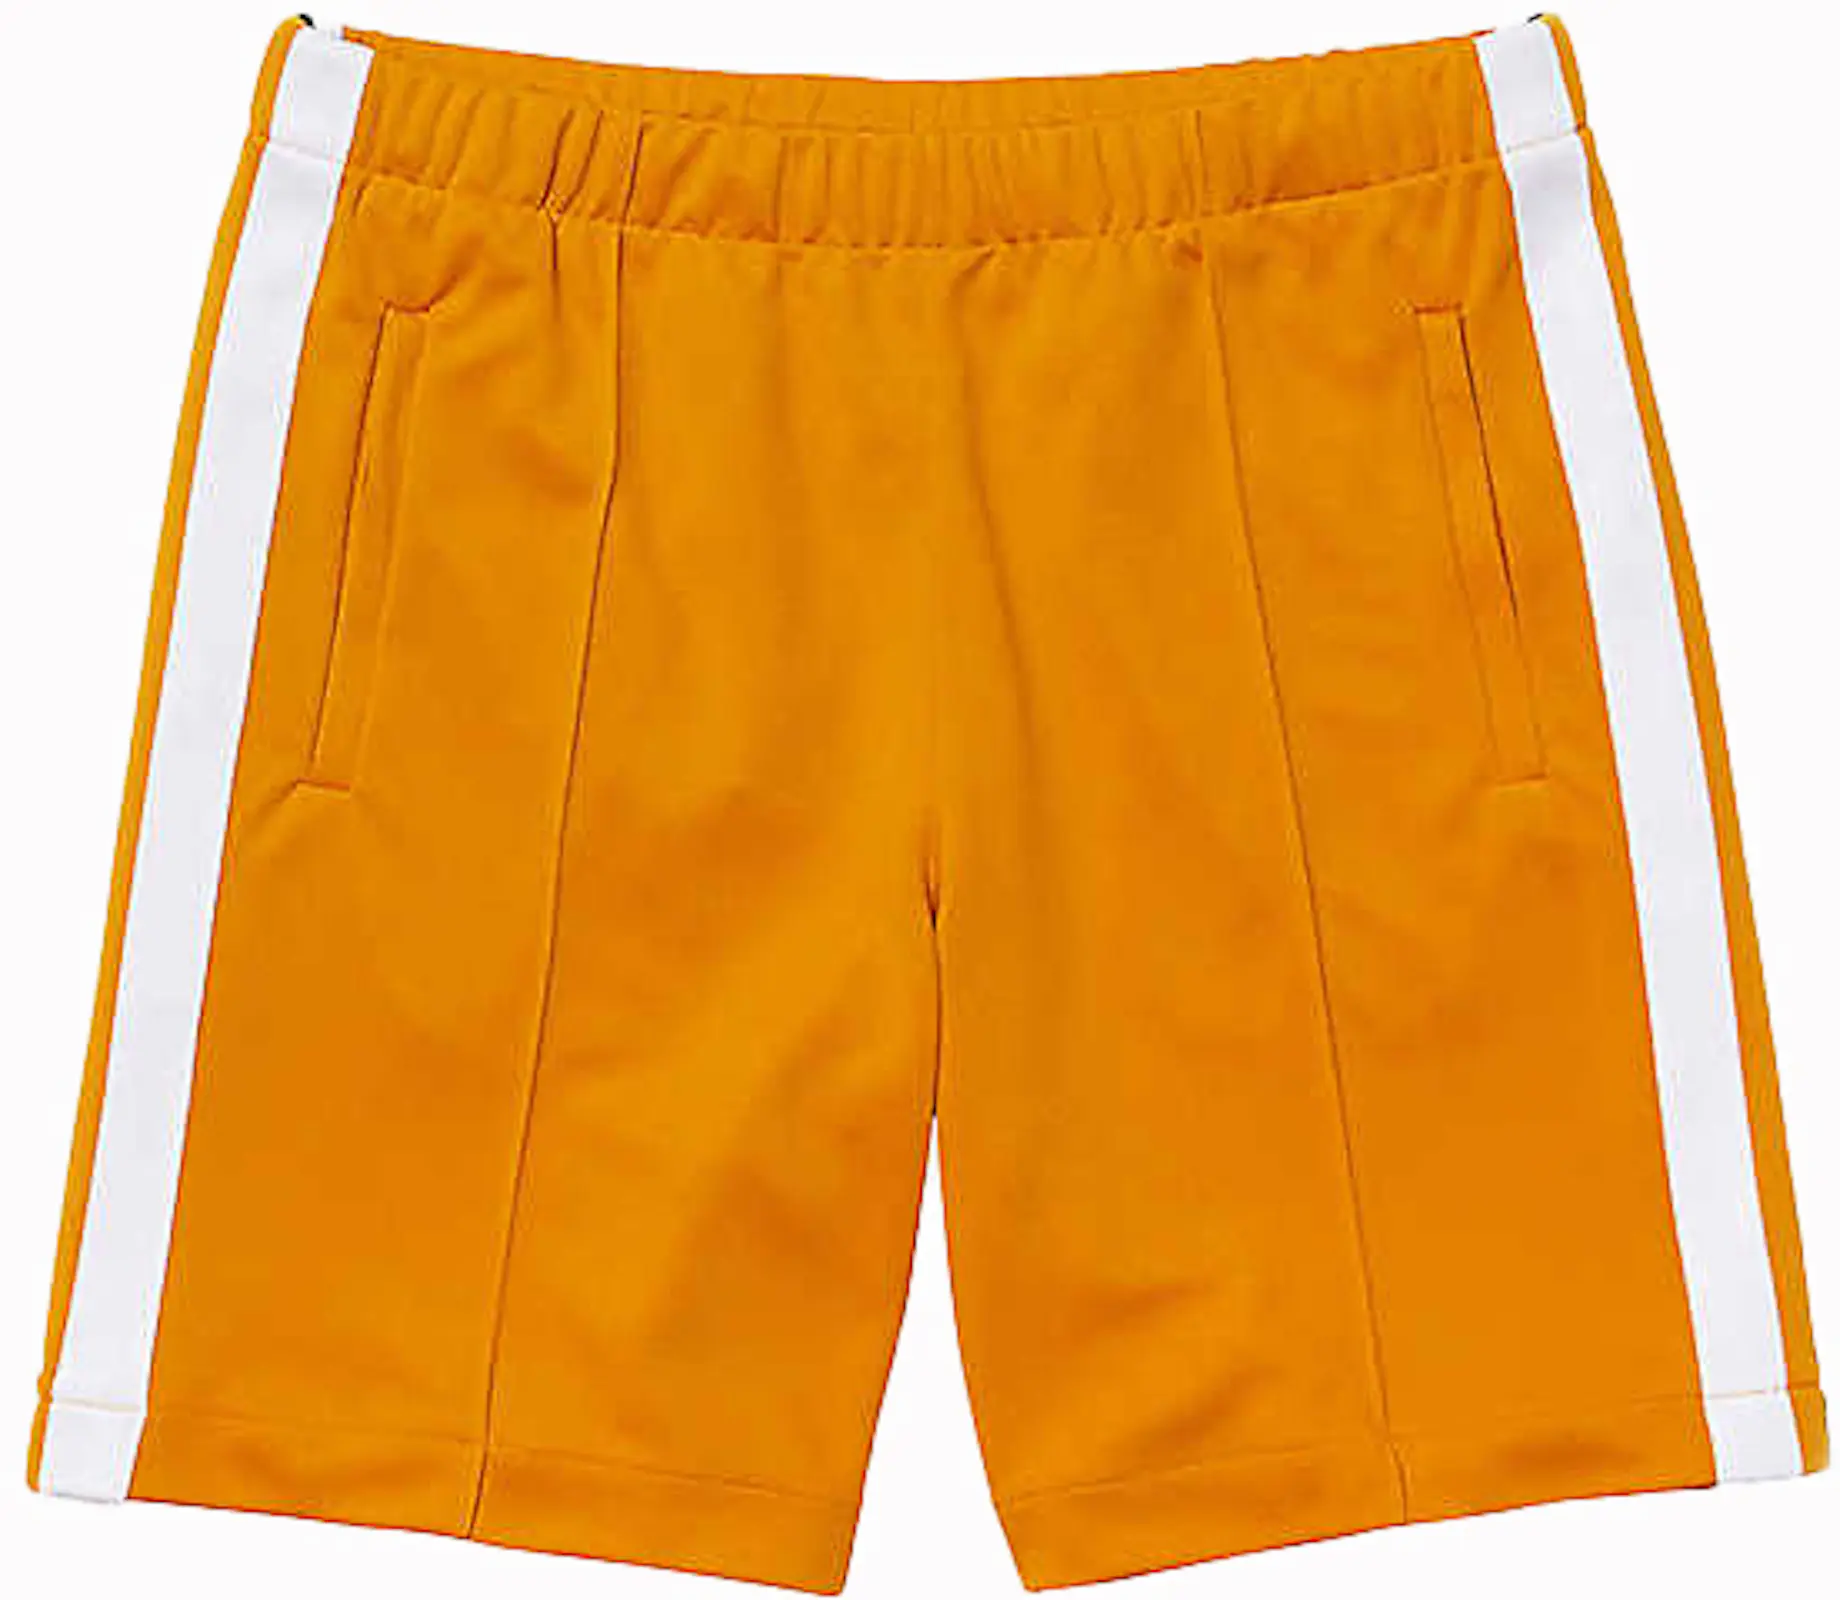 Lacoste x Ricky Regal Contrast Bands Piqué Shorts Yellow - SS21